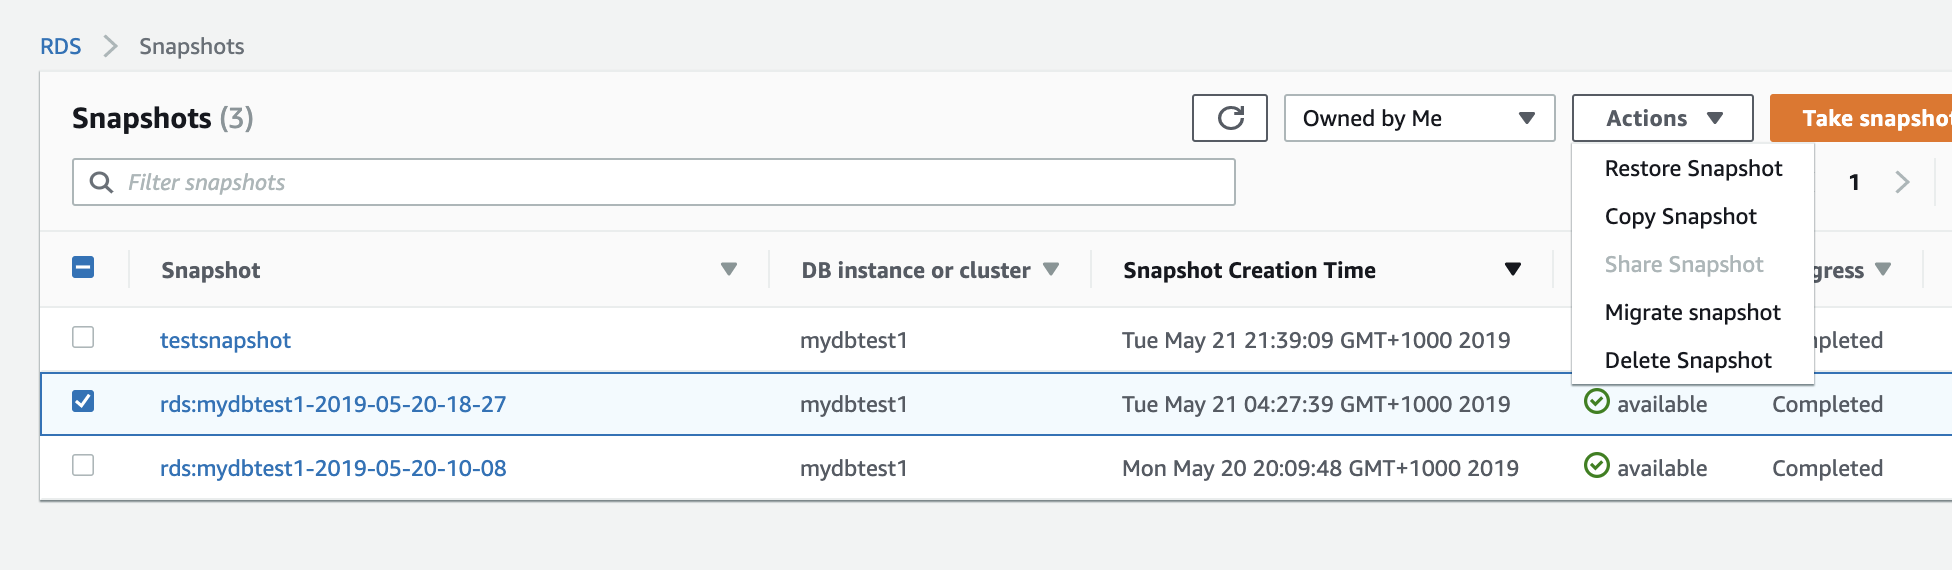 RDS Snapshots
Snapshots (3)
Q
[—] Snapshot

testsnapshot

DB instance or cluster ¥

mydbtest1

SG Owned by Me v

Snapshot Creation Time v

Tue May 21 21:39:09 GMT+1000 2019

Actions v Take snapsho'

rds:mydbtest1-2019-05-20-18-27

mydbtest1

Tue May 21 04:27:39 GMT+1000 2019

Restore Snapshot 1

Copy Snapshot
gress V
Migrate snapshot

ipleted
Delete Snapshot

© available Completed

rds:mydbtest1-2019-05-20-10-08

mydbtest1

Mon May 20 20:09:48 GMT+1000 2019

© available Completed